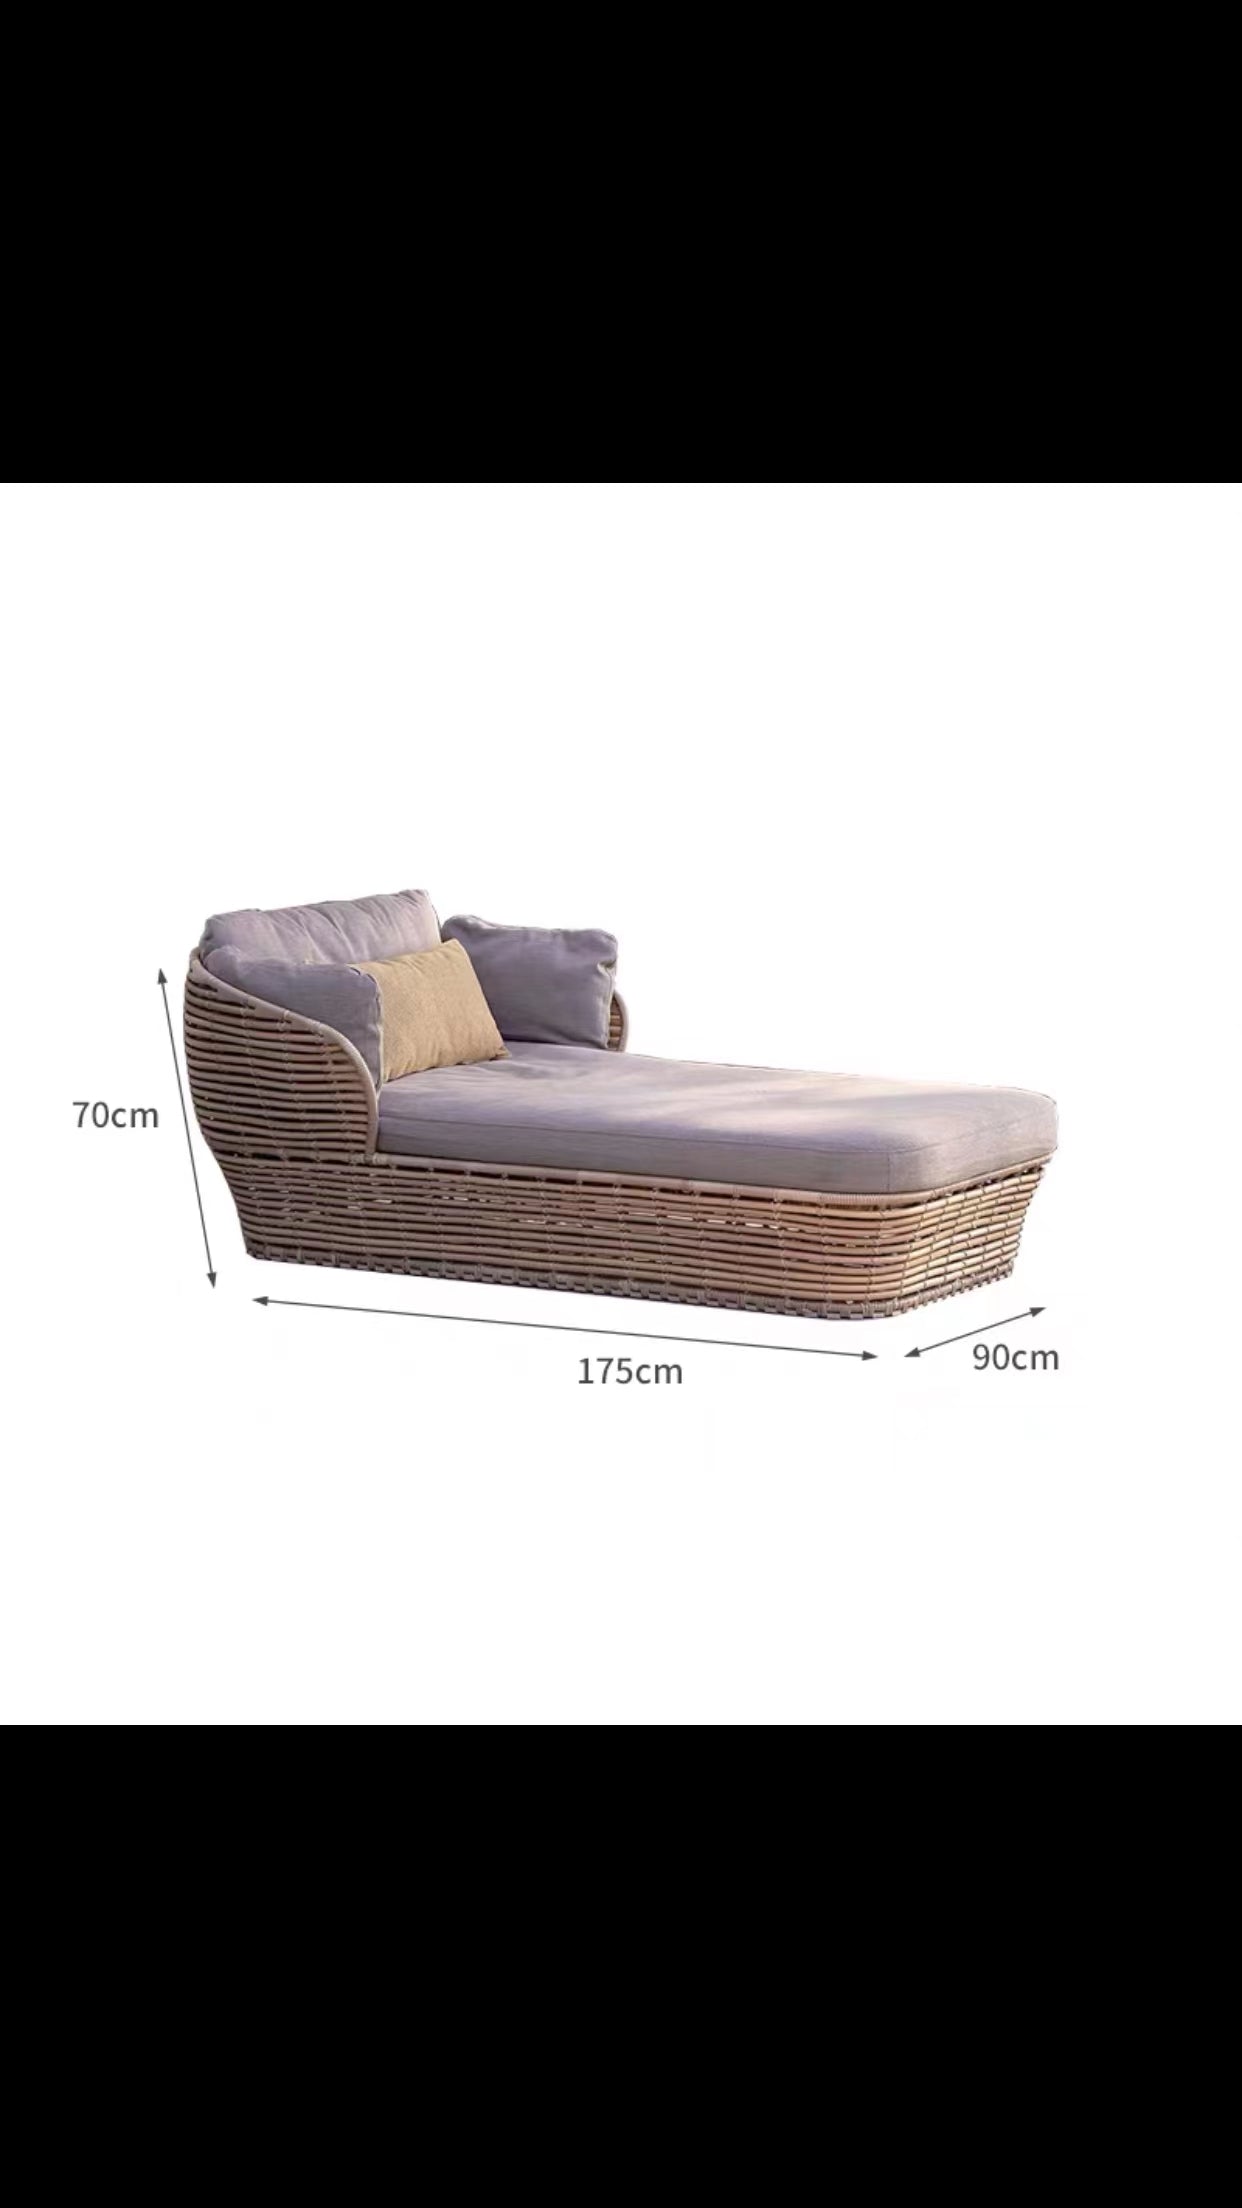 Cadeo Bamboo Daybed - 4 Seasons Home Gadgets